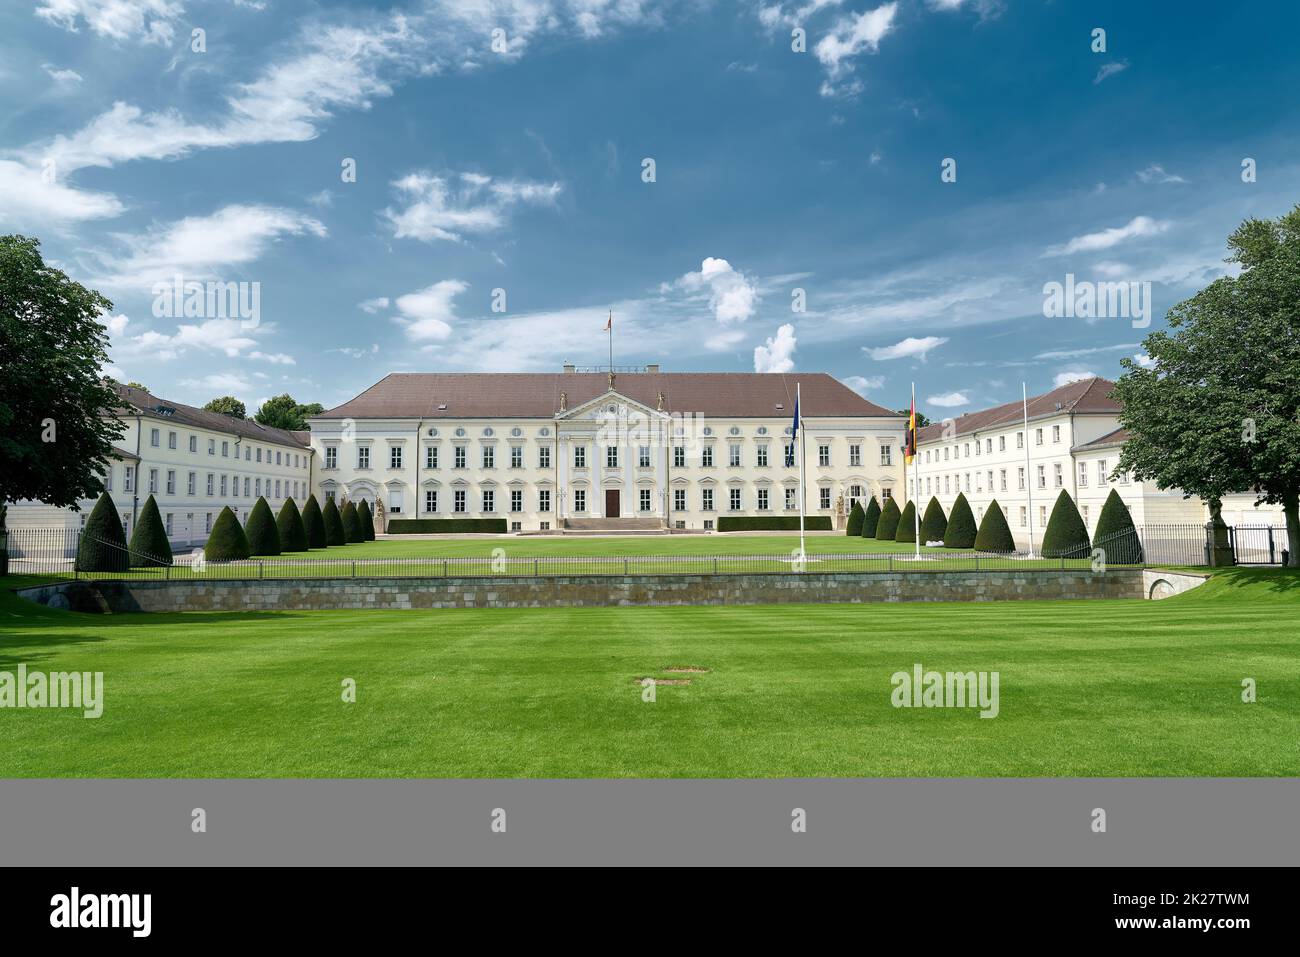 The historic Bellevue Palace, now the official residence of the Federal President in the German capital Berlin Stock Photo